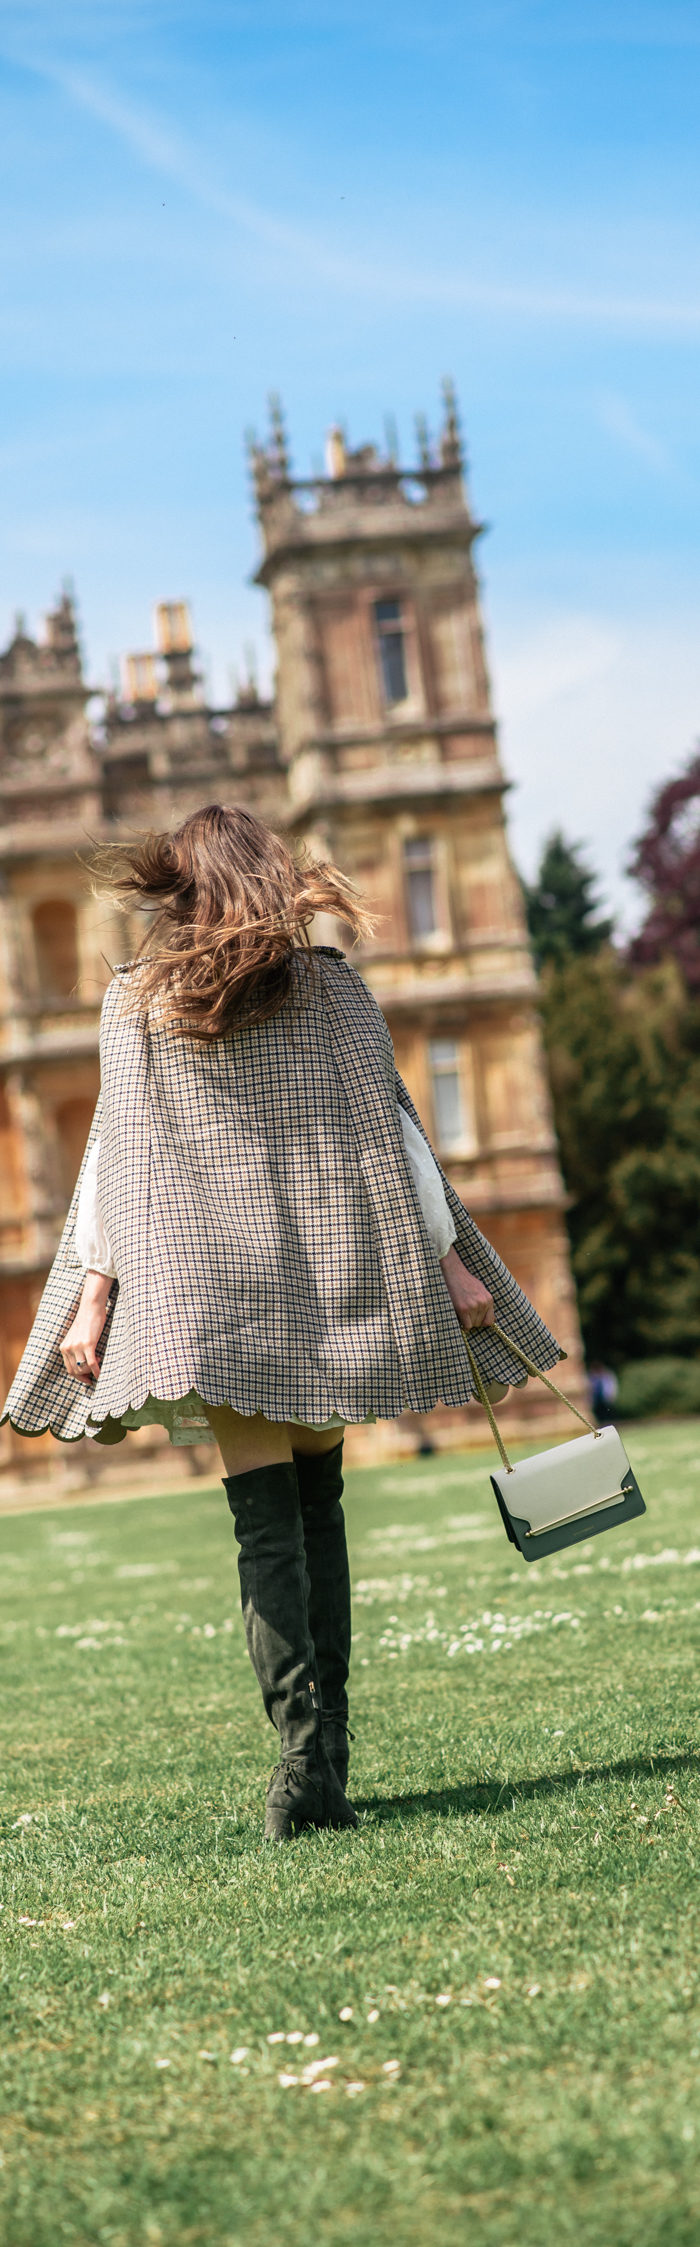 Alyssa Campanella of The A List blog visits Downton Abbey locations at Highclere Castle wearing RED Valentino plaid cape and Strathberry East West bag